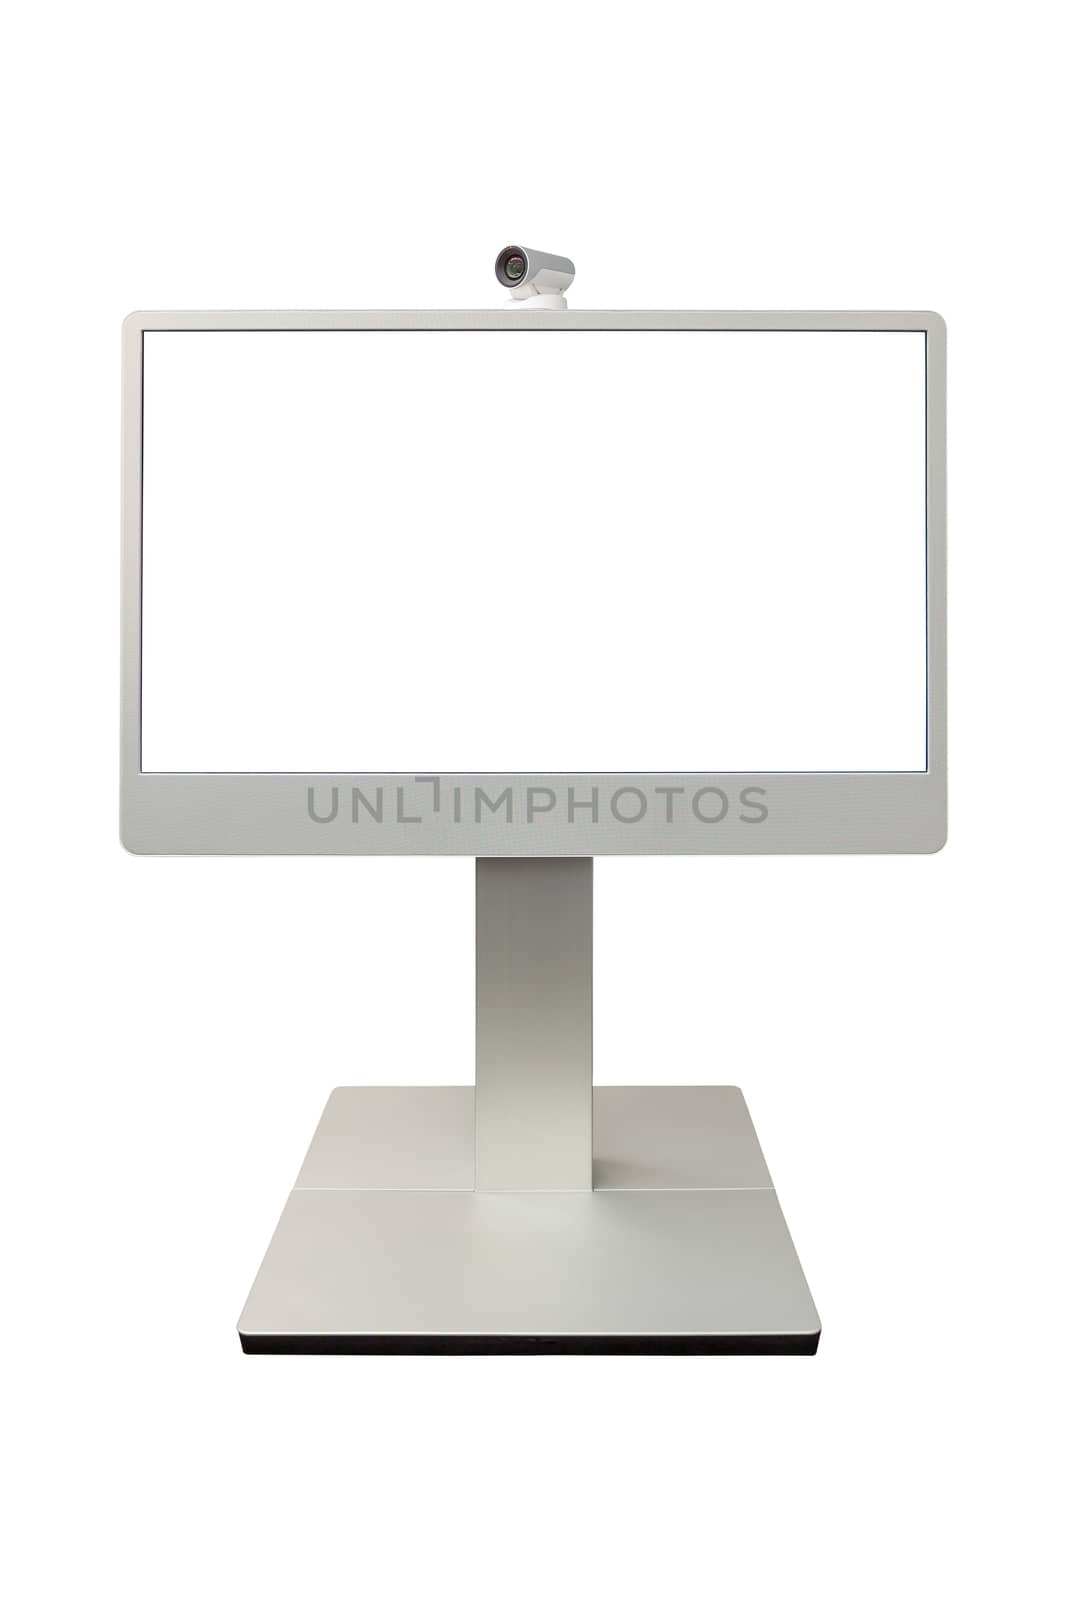 teleconference, video conference and telepresence camera display isolated on white background